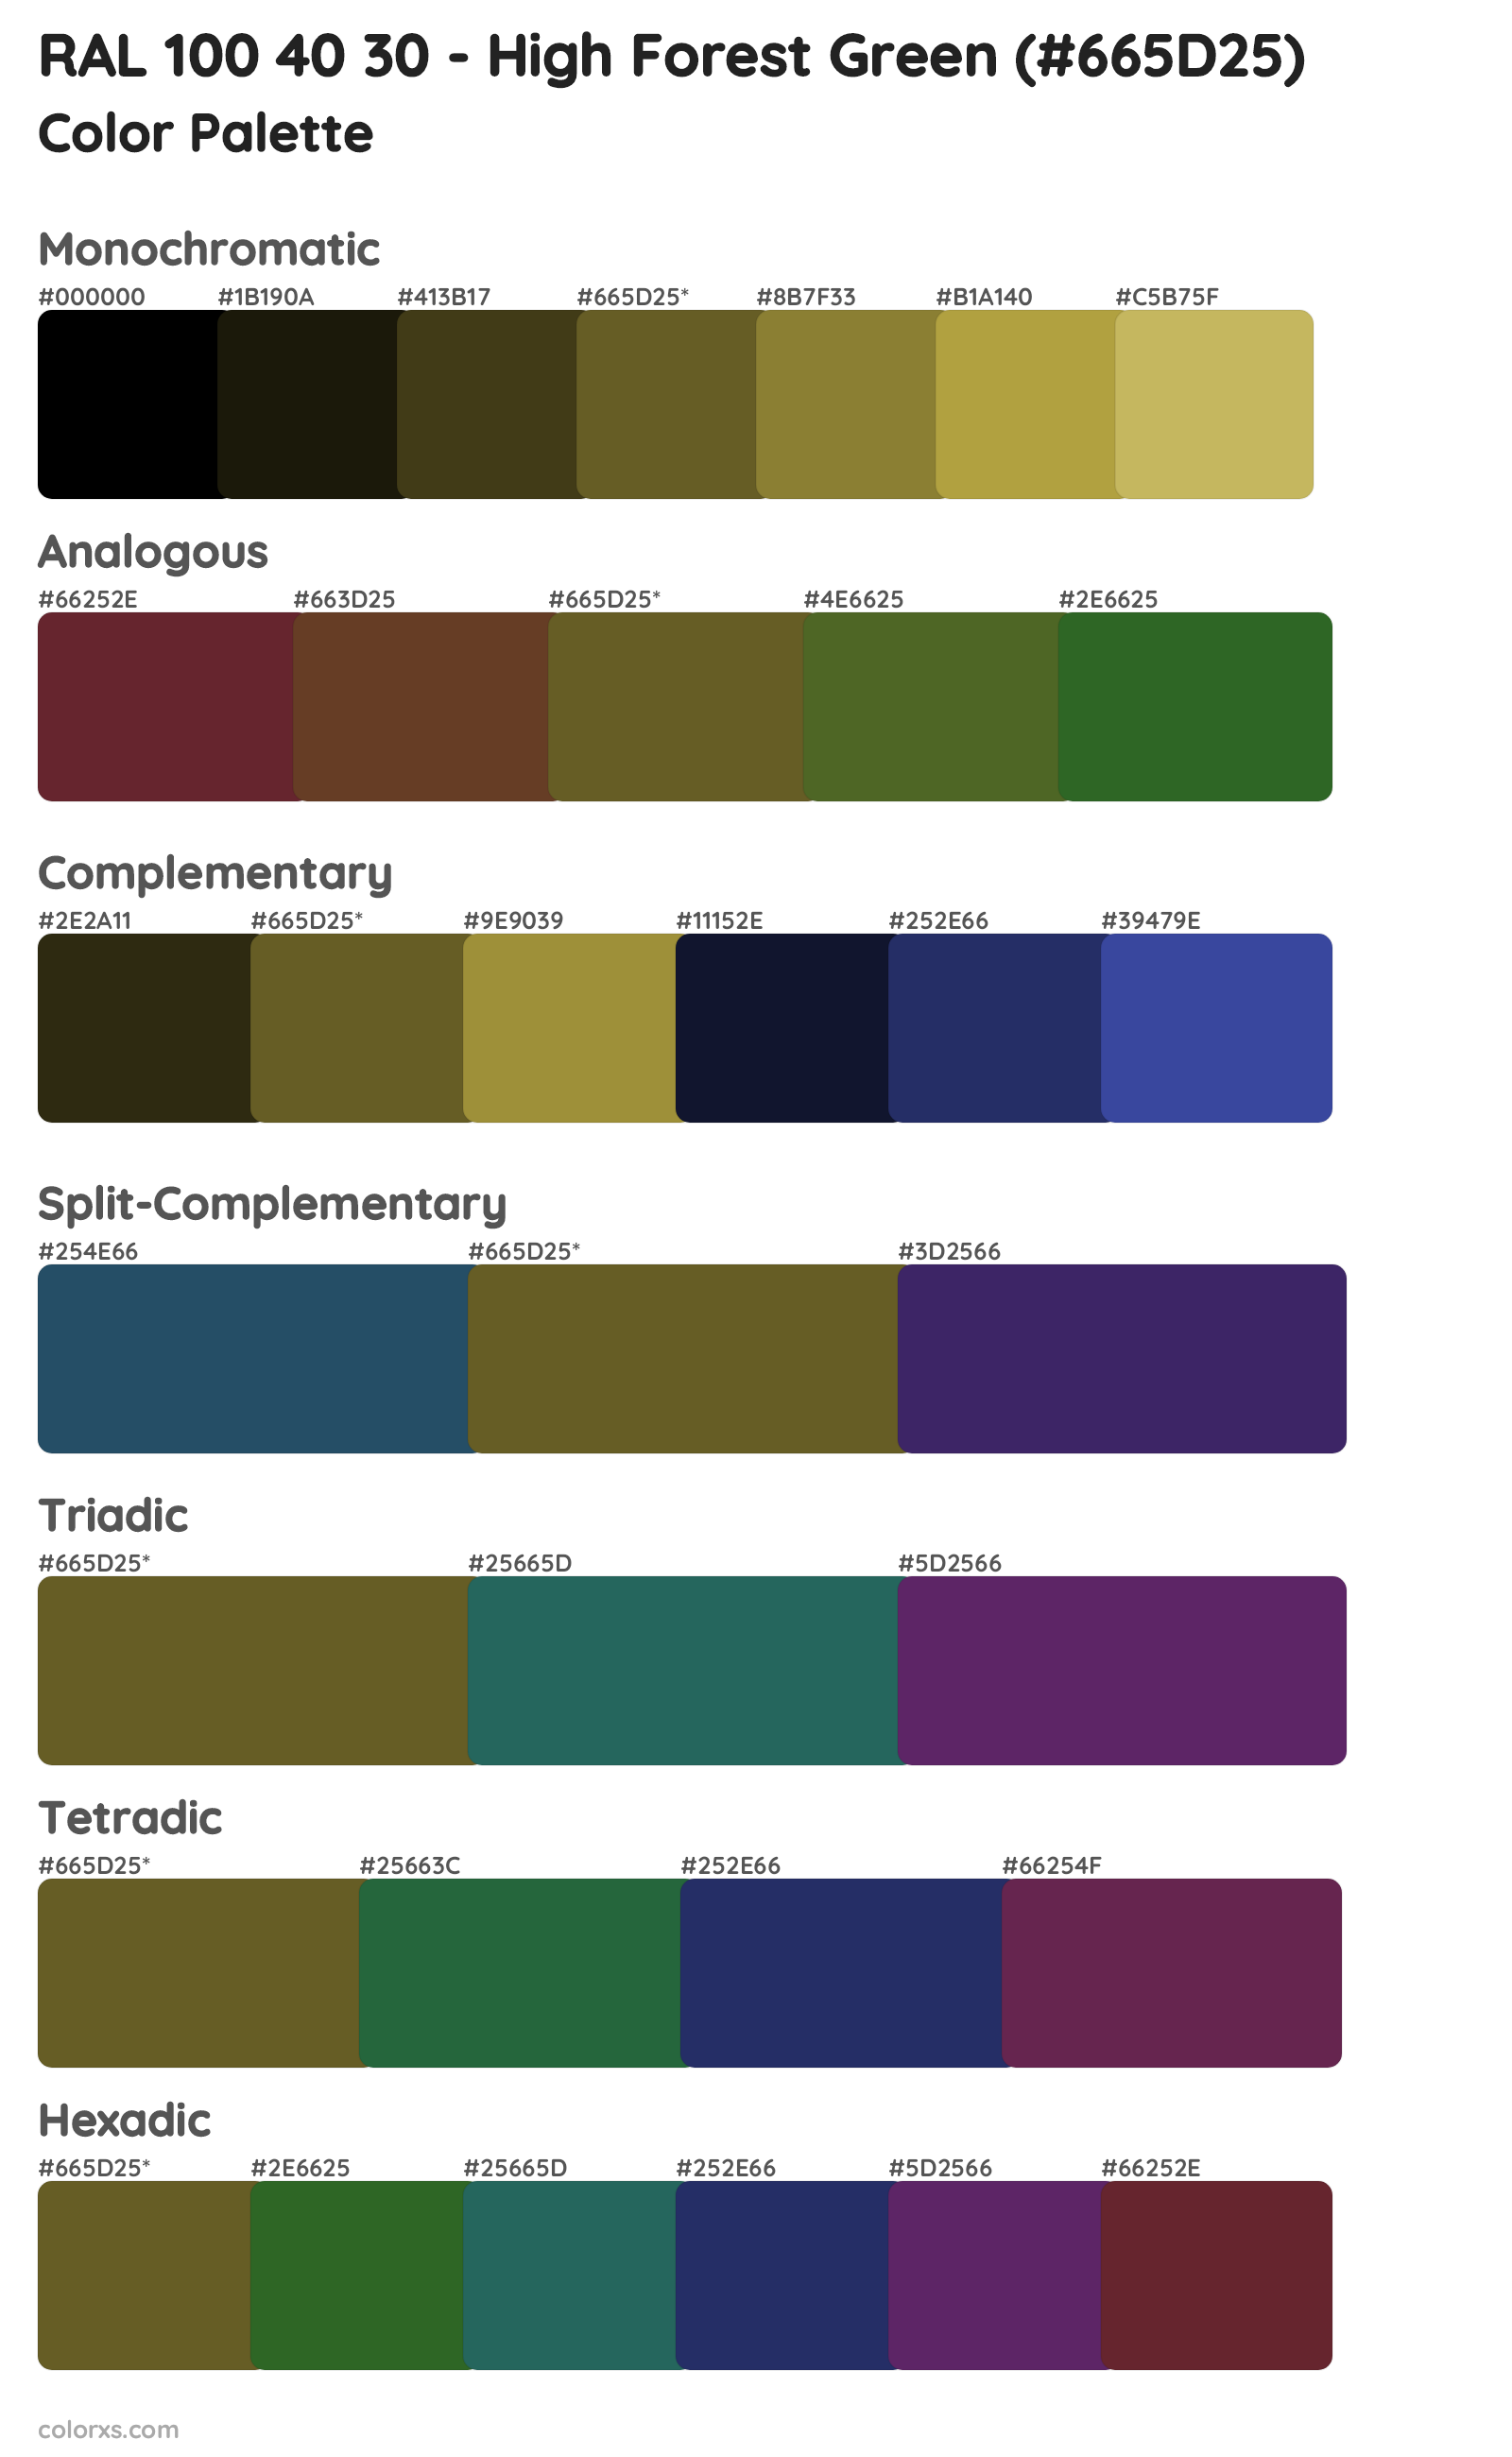 RAL 100 40 30 - High Forest Green Color Scheme Palettes